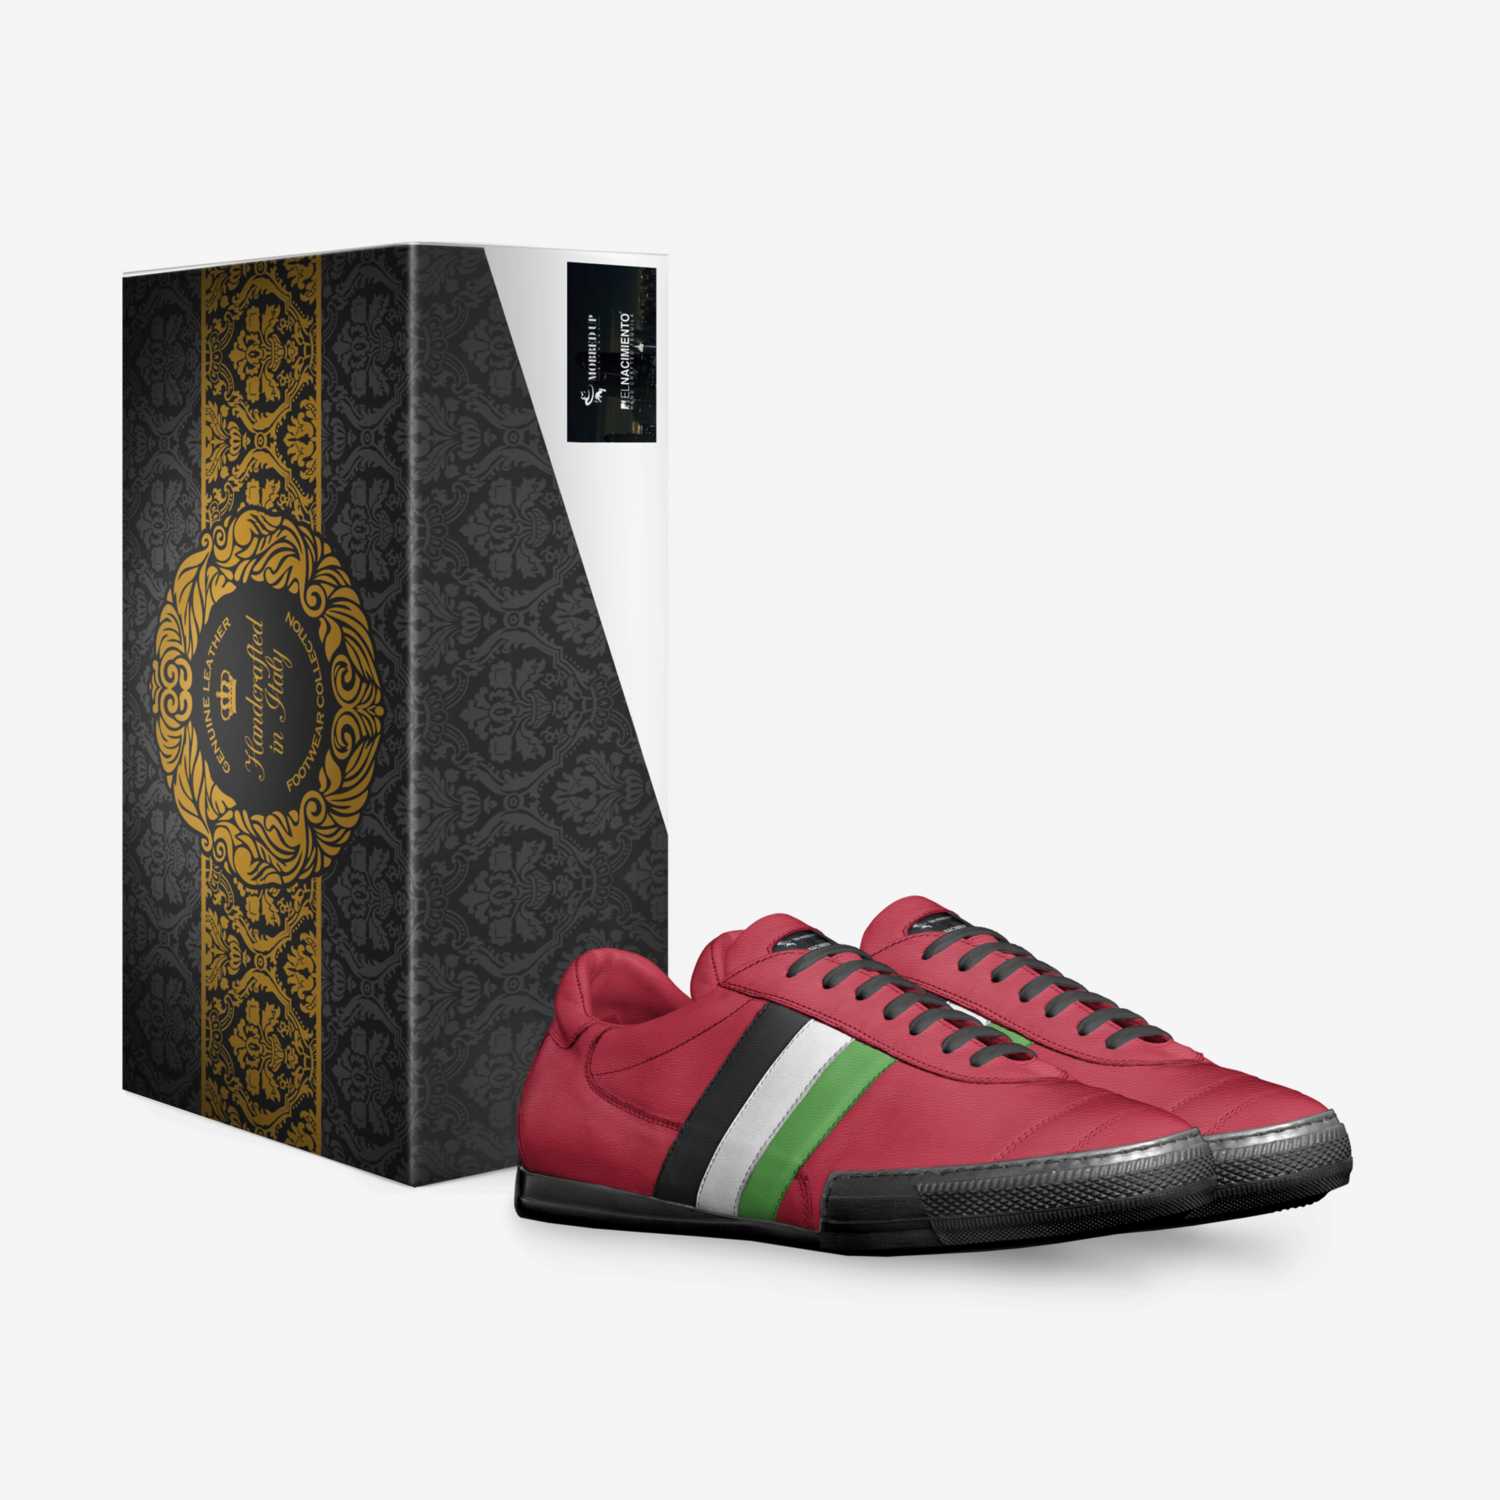 Arabb Luciano  custom made in Italy shoes by Gino Gallela | Box view